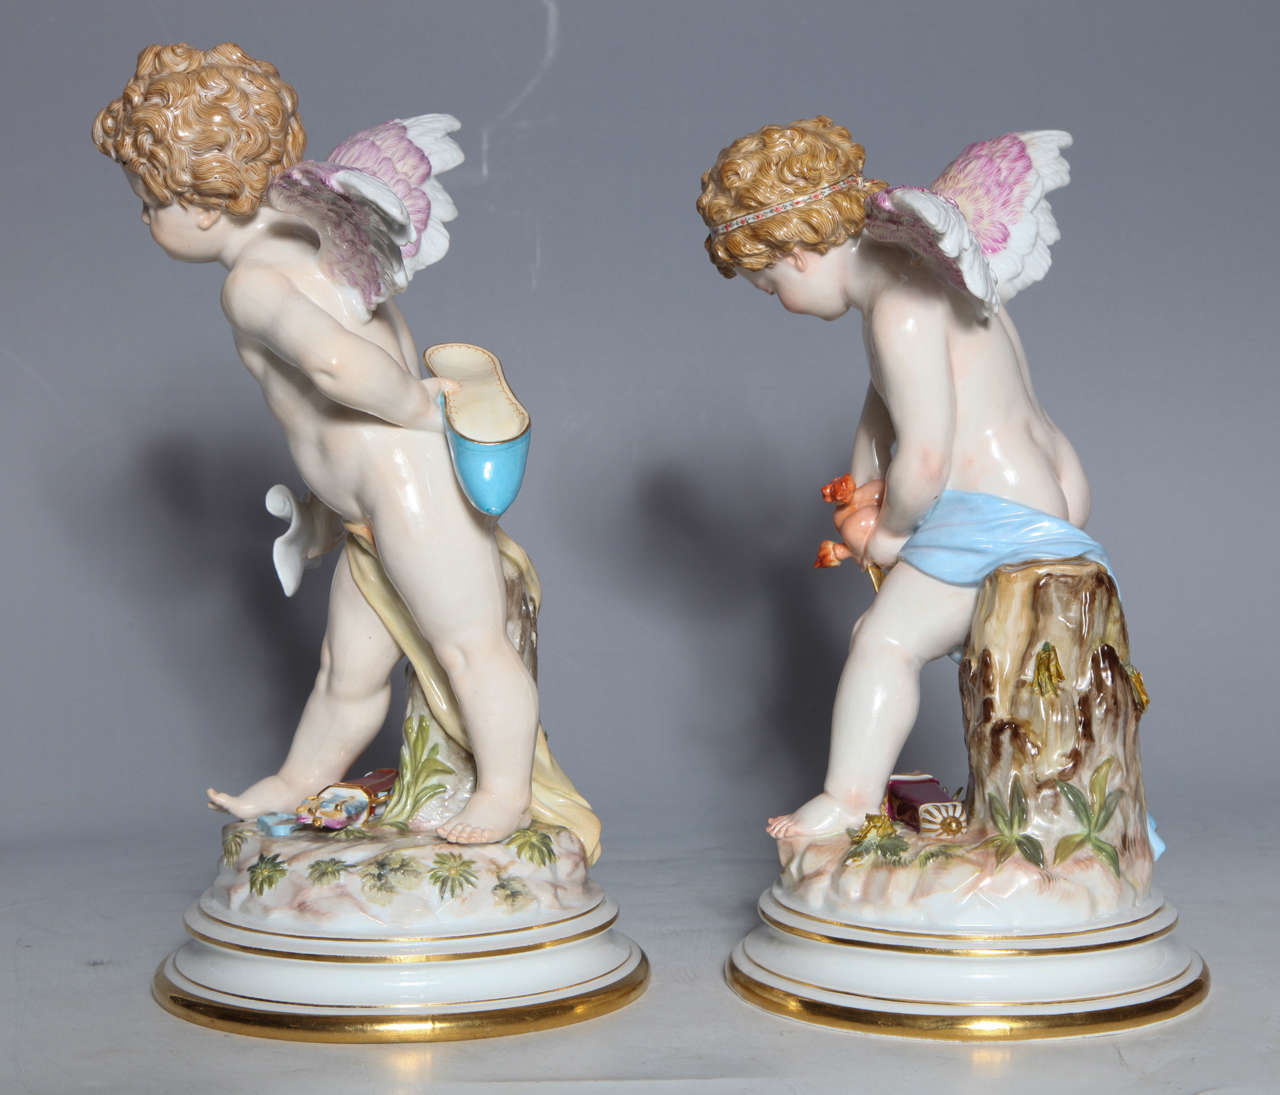 Meissen Porcelain Large Devisenkinder Cupid Figurines with Markings 1860s In Excellent Condition For Sale In New York, NY